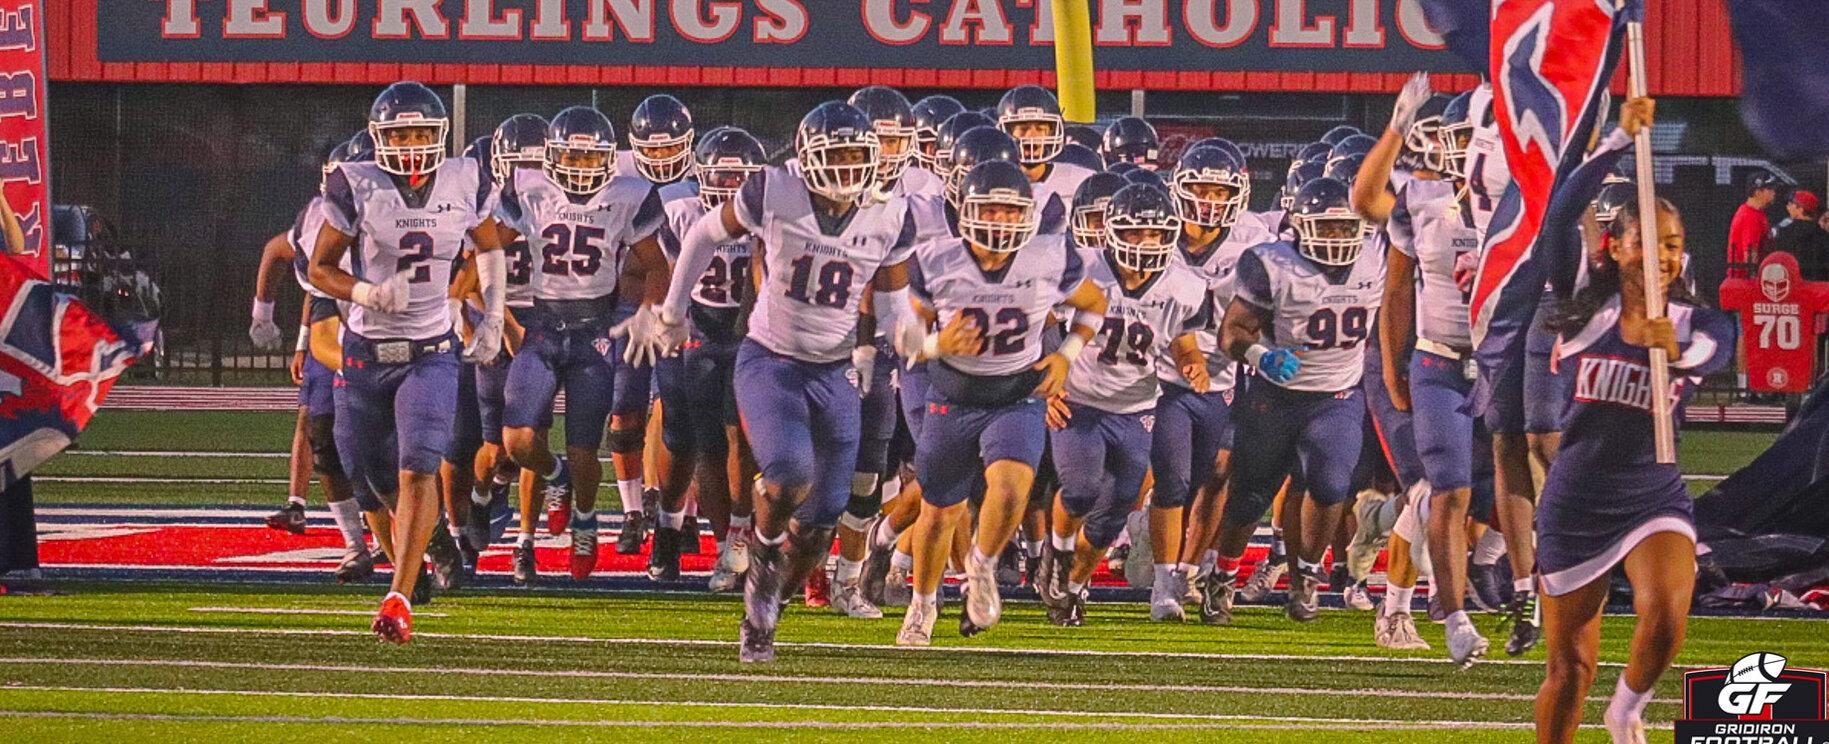 Lafayette Christian Academy Dominates Teurlings Catholic 62-3 in Statement Game